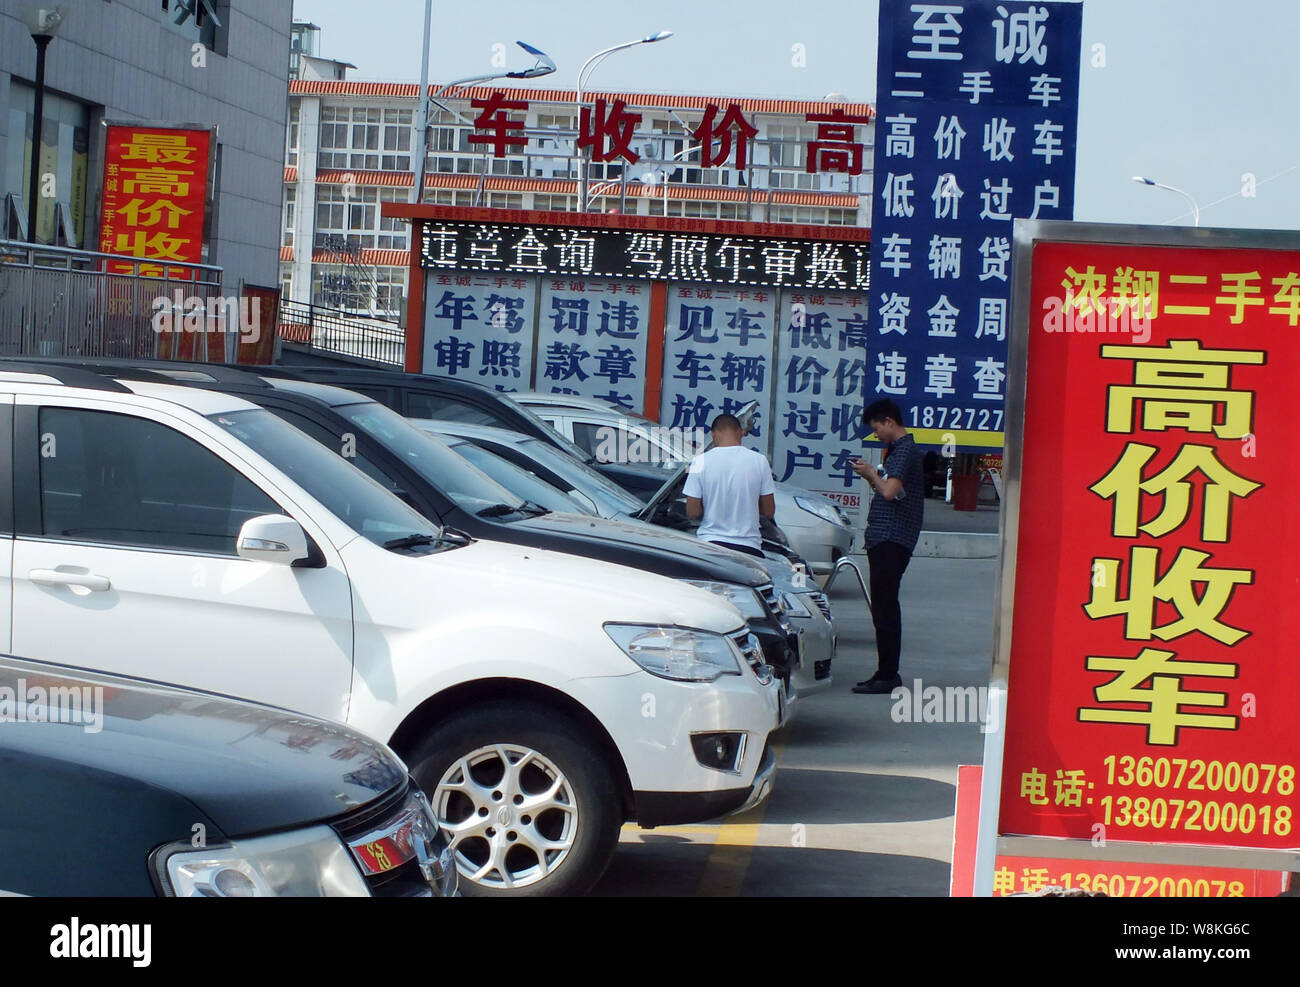 --FILE--Chinese buyers look at second-hand cars at a used car market in Yichang city, central Chna's Hubei province, 11 August 2015.   China aims to t Stock Photo